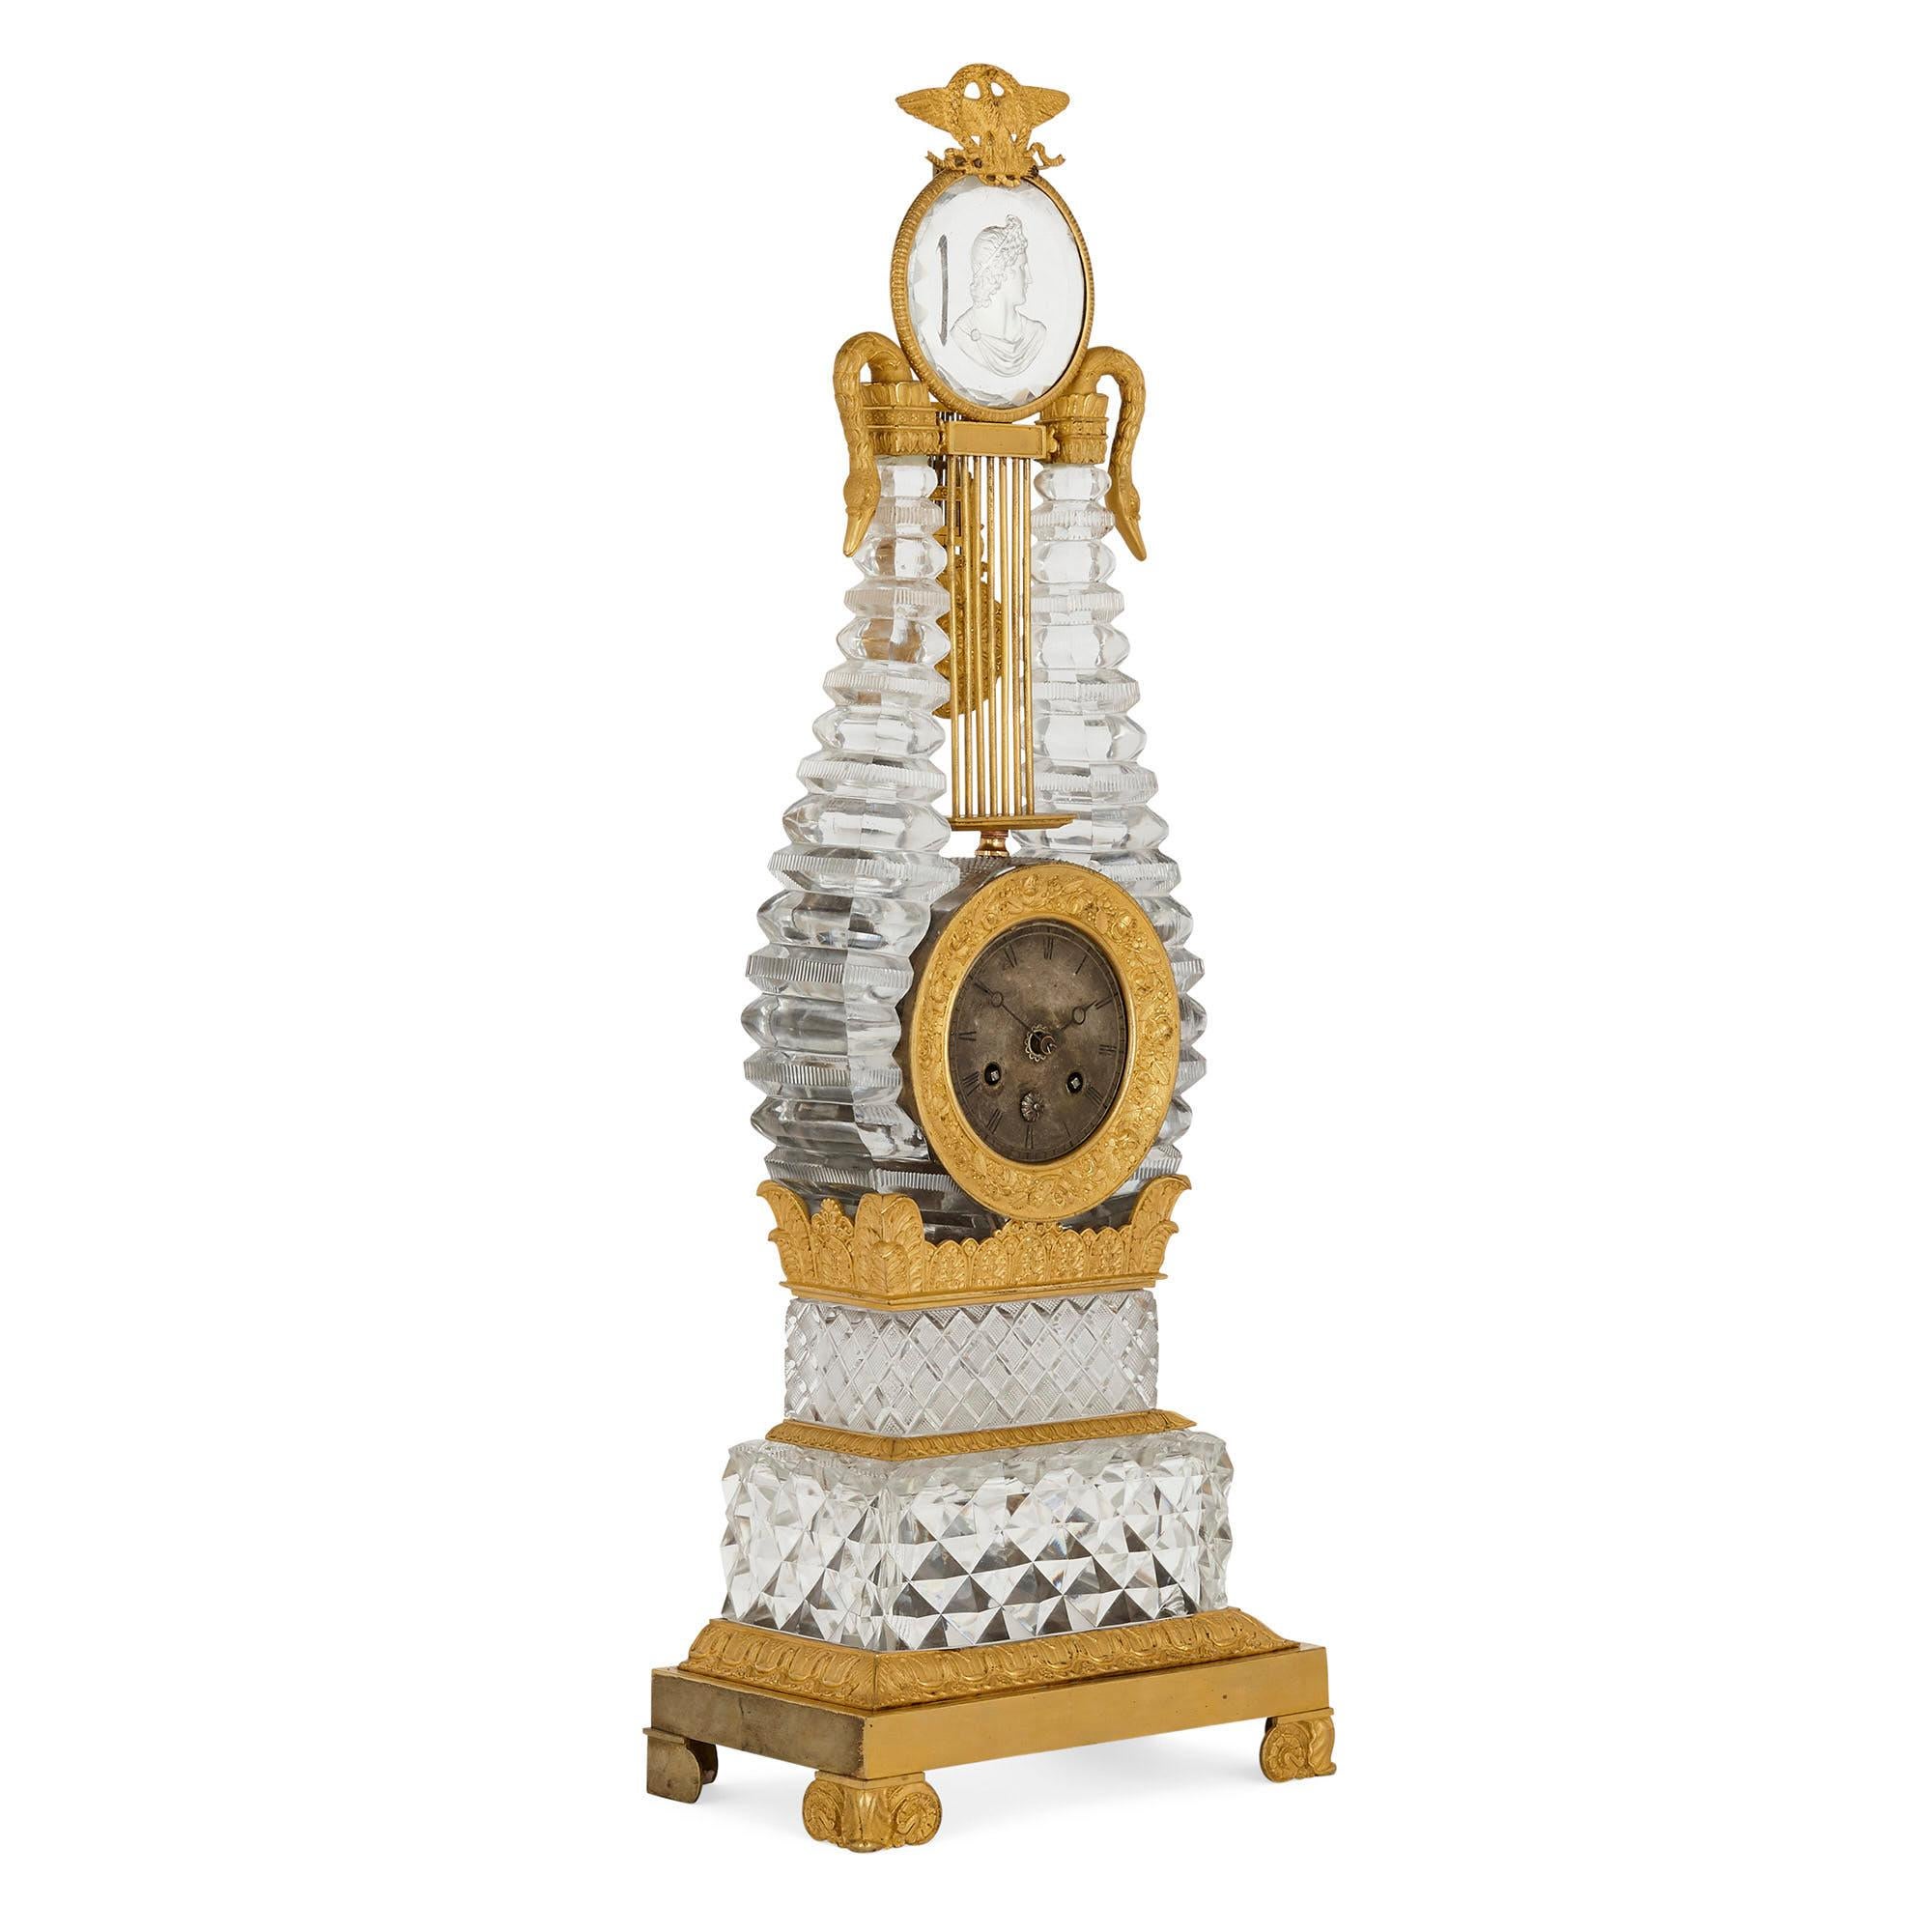 Restauration gilt bronze mounted crystal lyre mantel clock
French, circa 1820
Measures: Height 67cm, width 23cm, depth 14cm

This superb mantel clock takes the form of a classical lyre. The clock, which is crafted from cut crystal mounted with